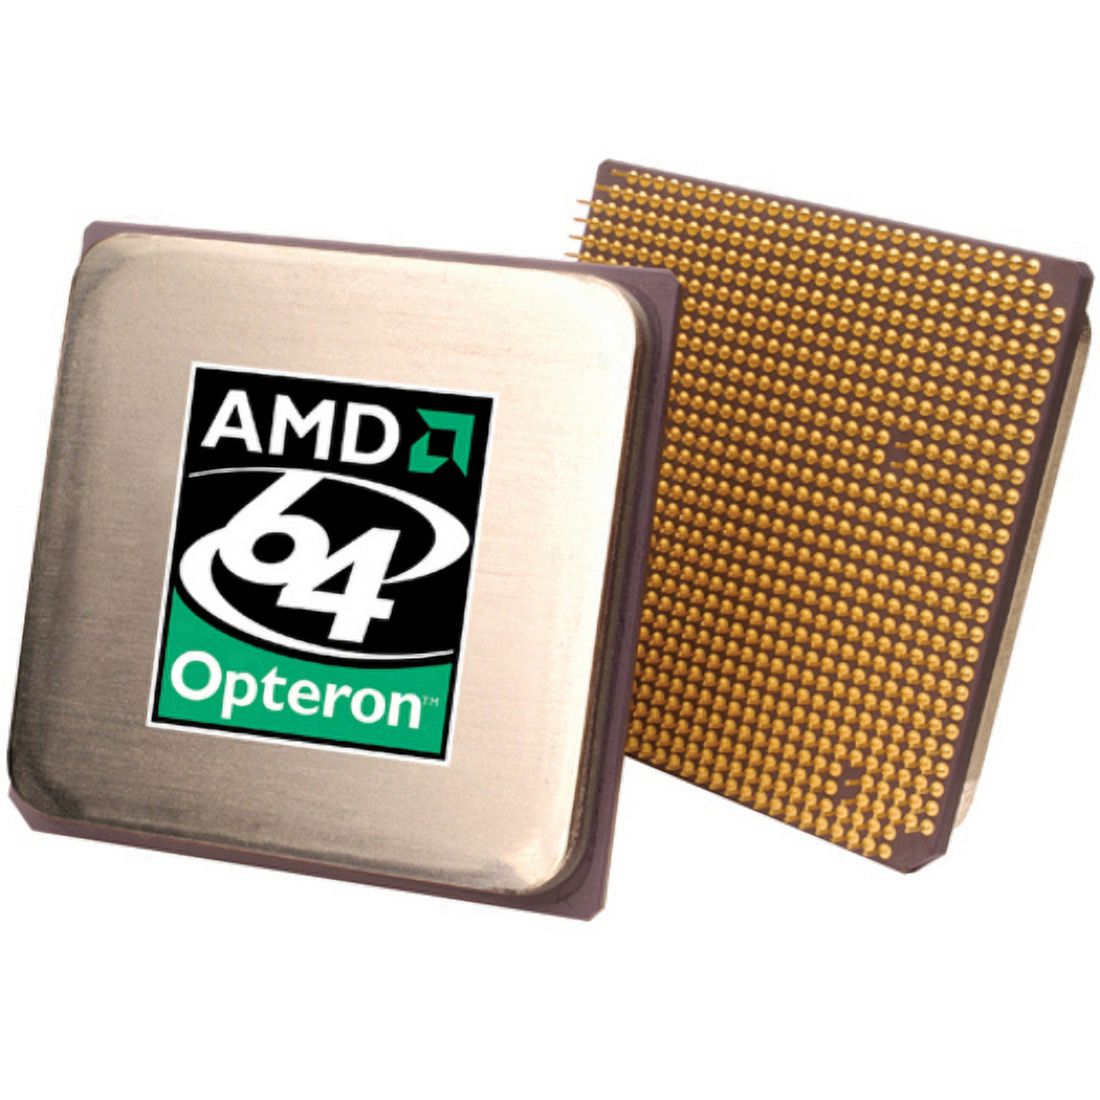 AMD Opteron 4200 4284 Octa-core (8 Core) 3 GHz Processor, Retail Pack - image 1 of 1